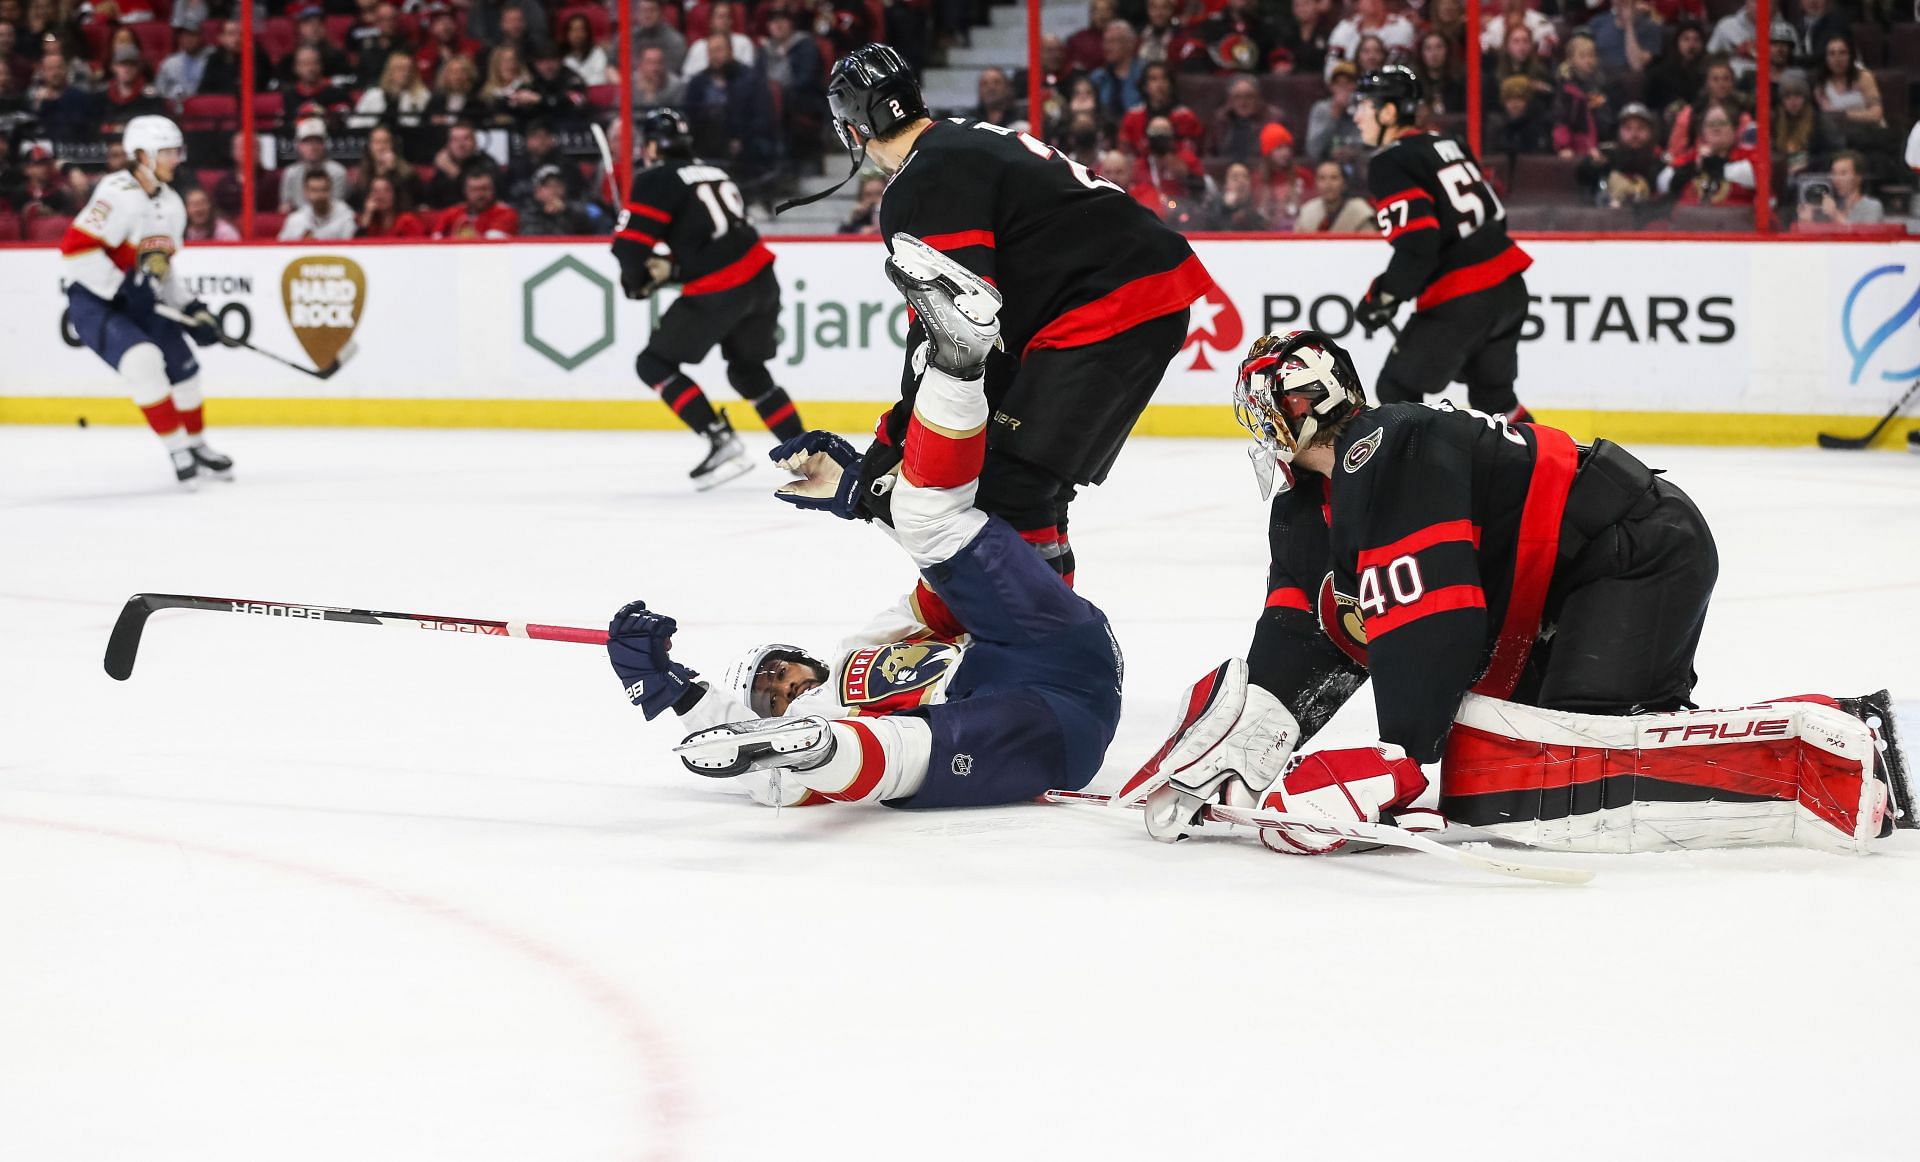 Florida Panthers v Ottawa Senators Live streaming options, how and where to watch NHL live on TV, channel list, and more